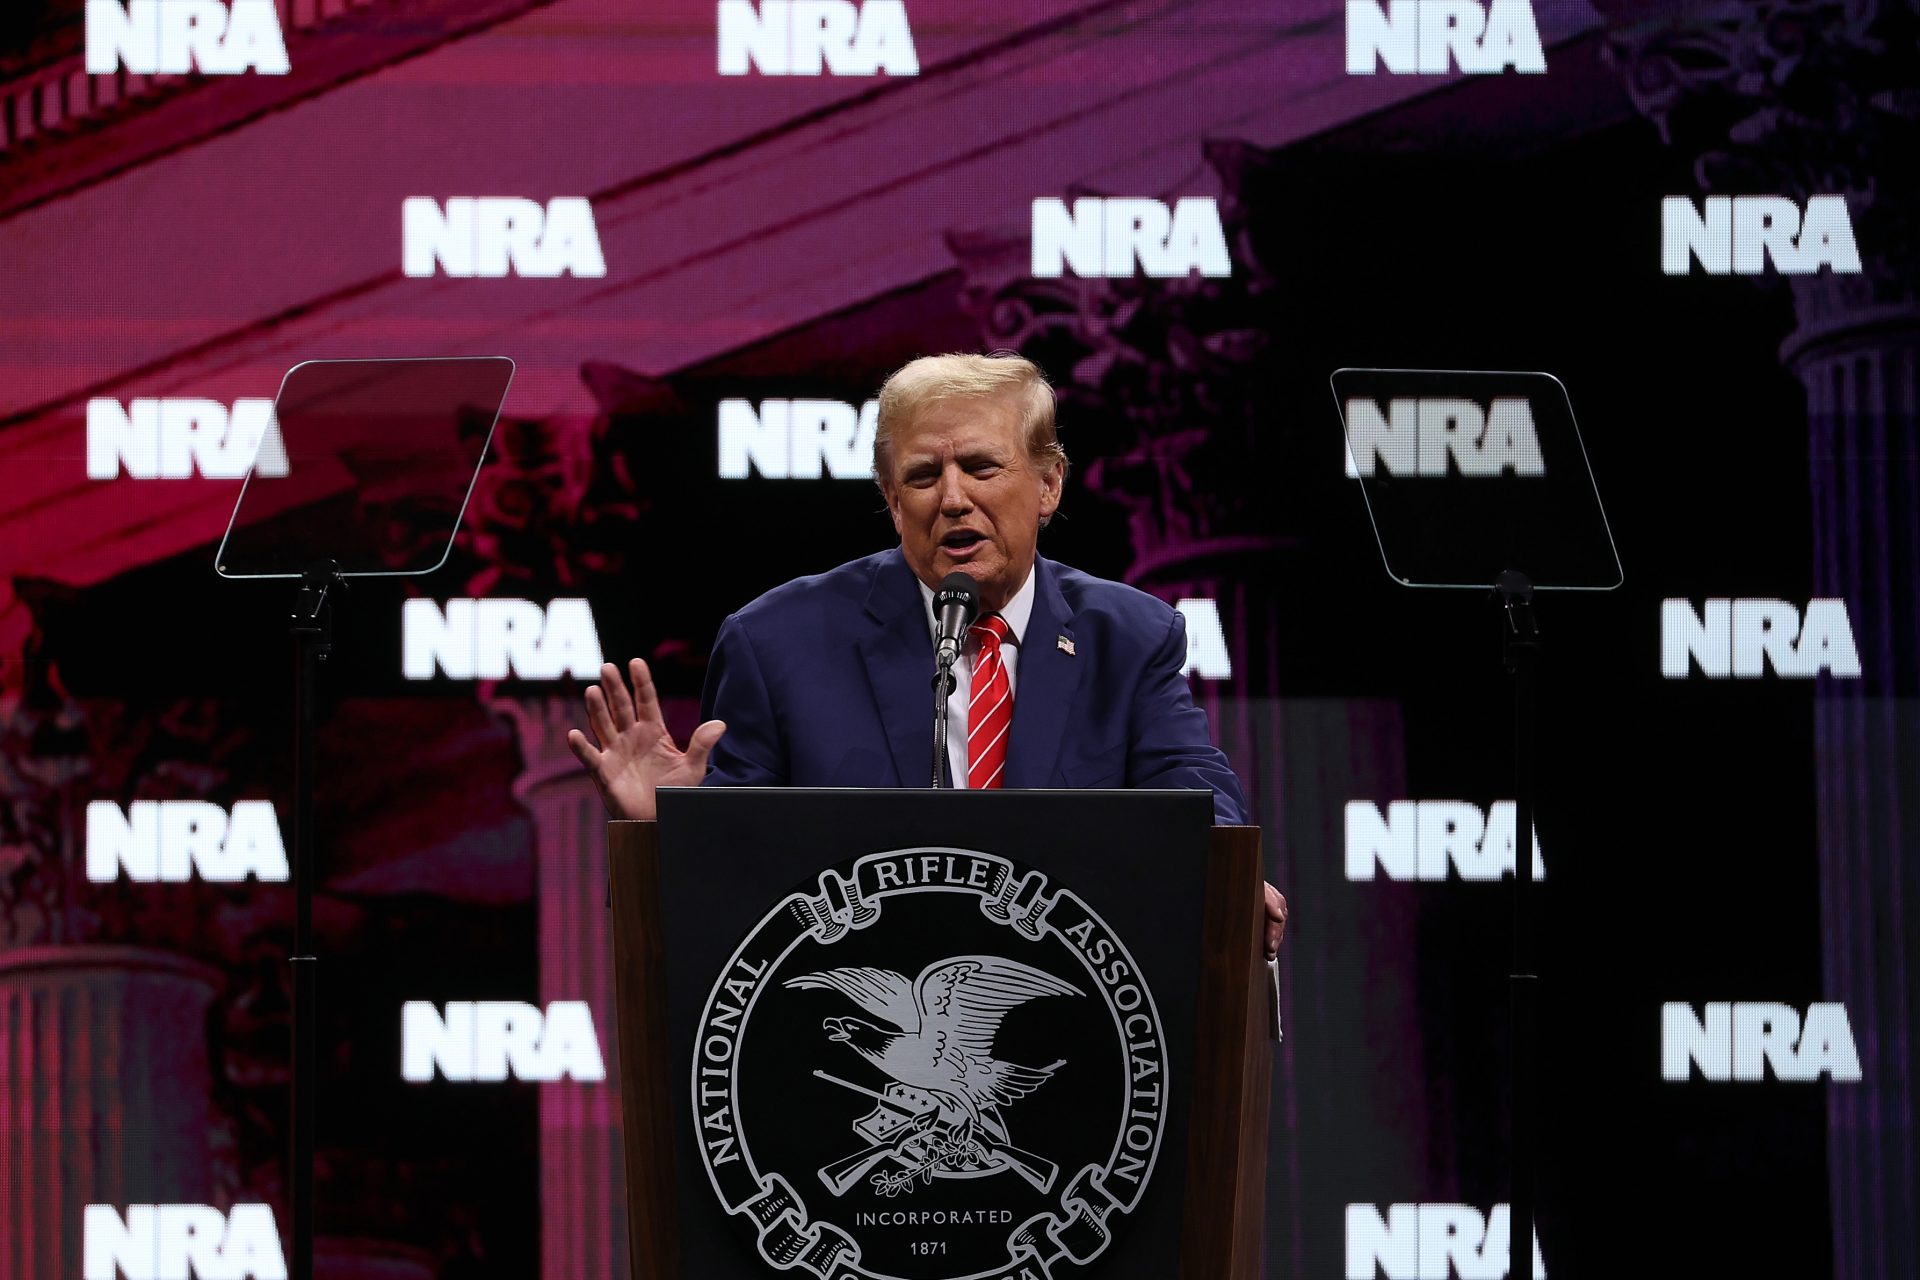 Remember when Trump got in big trouble for what he said at the NRA's annual meeting?